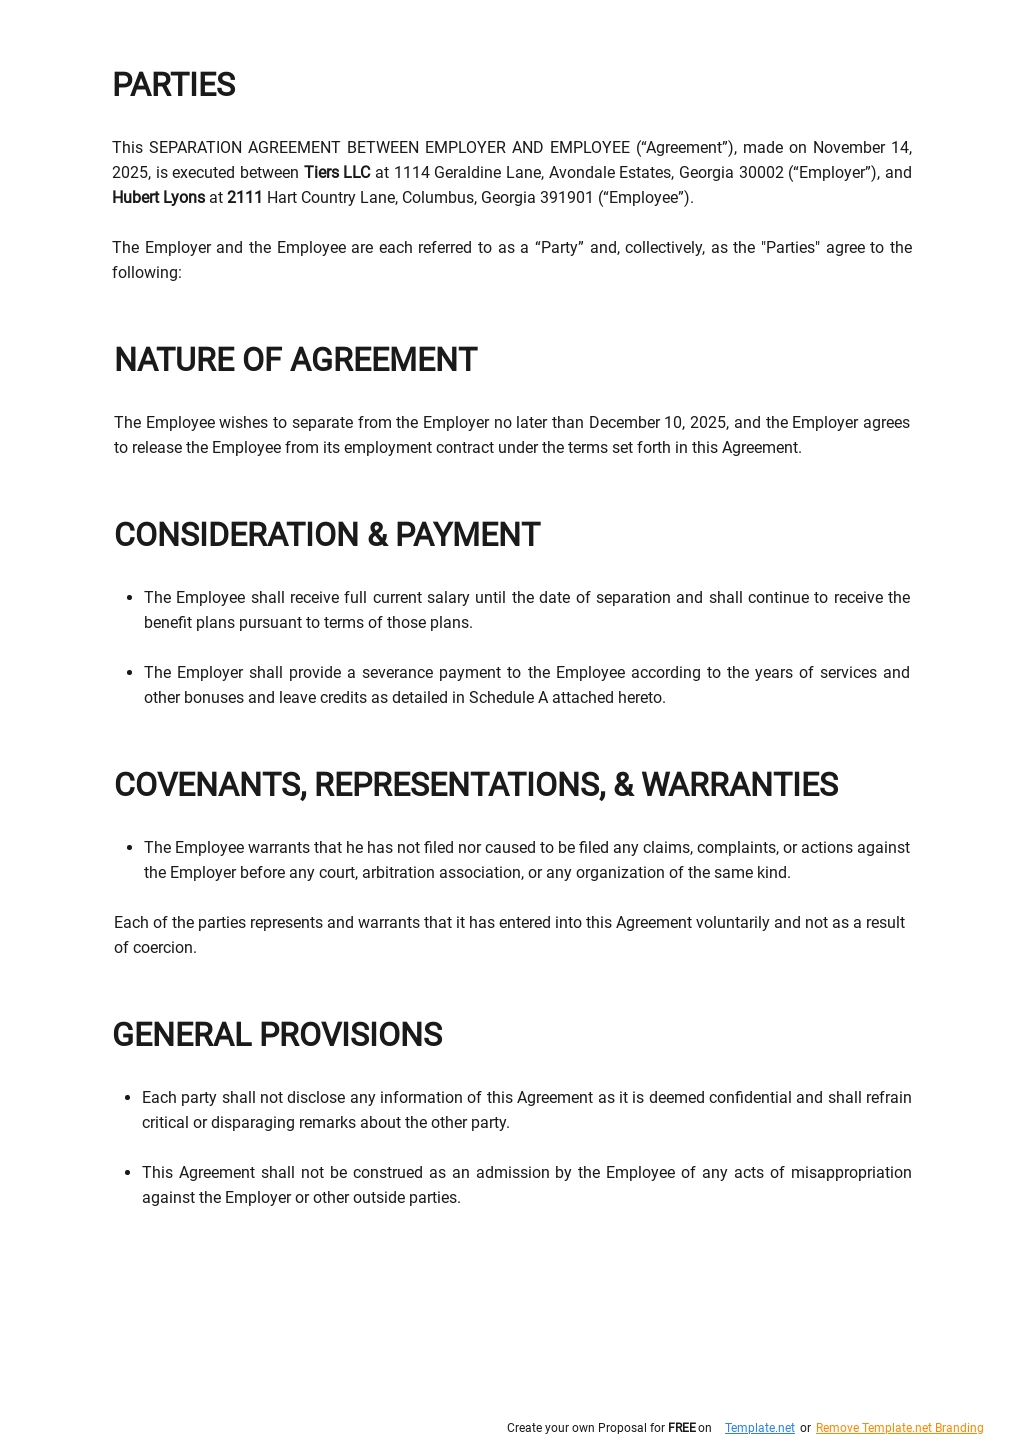 Separation Agreement Between Employer And Employee Template 1.jpe